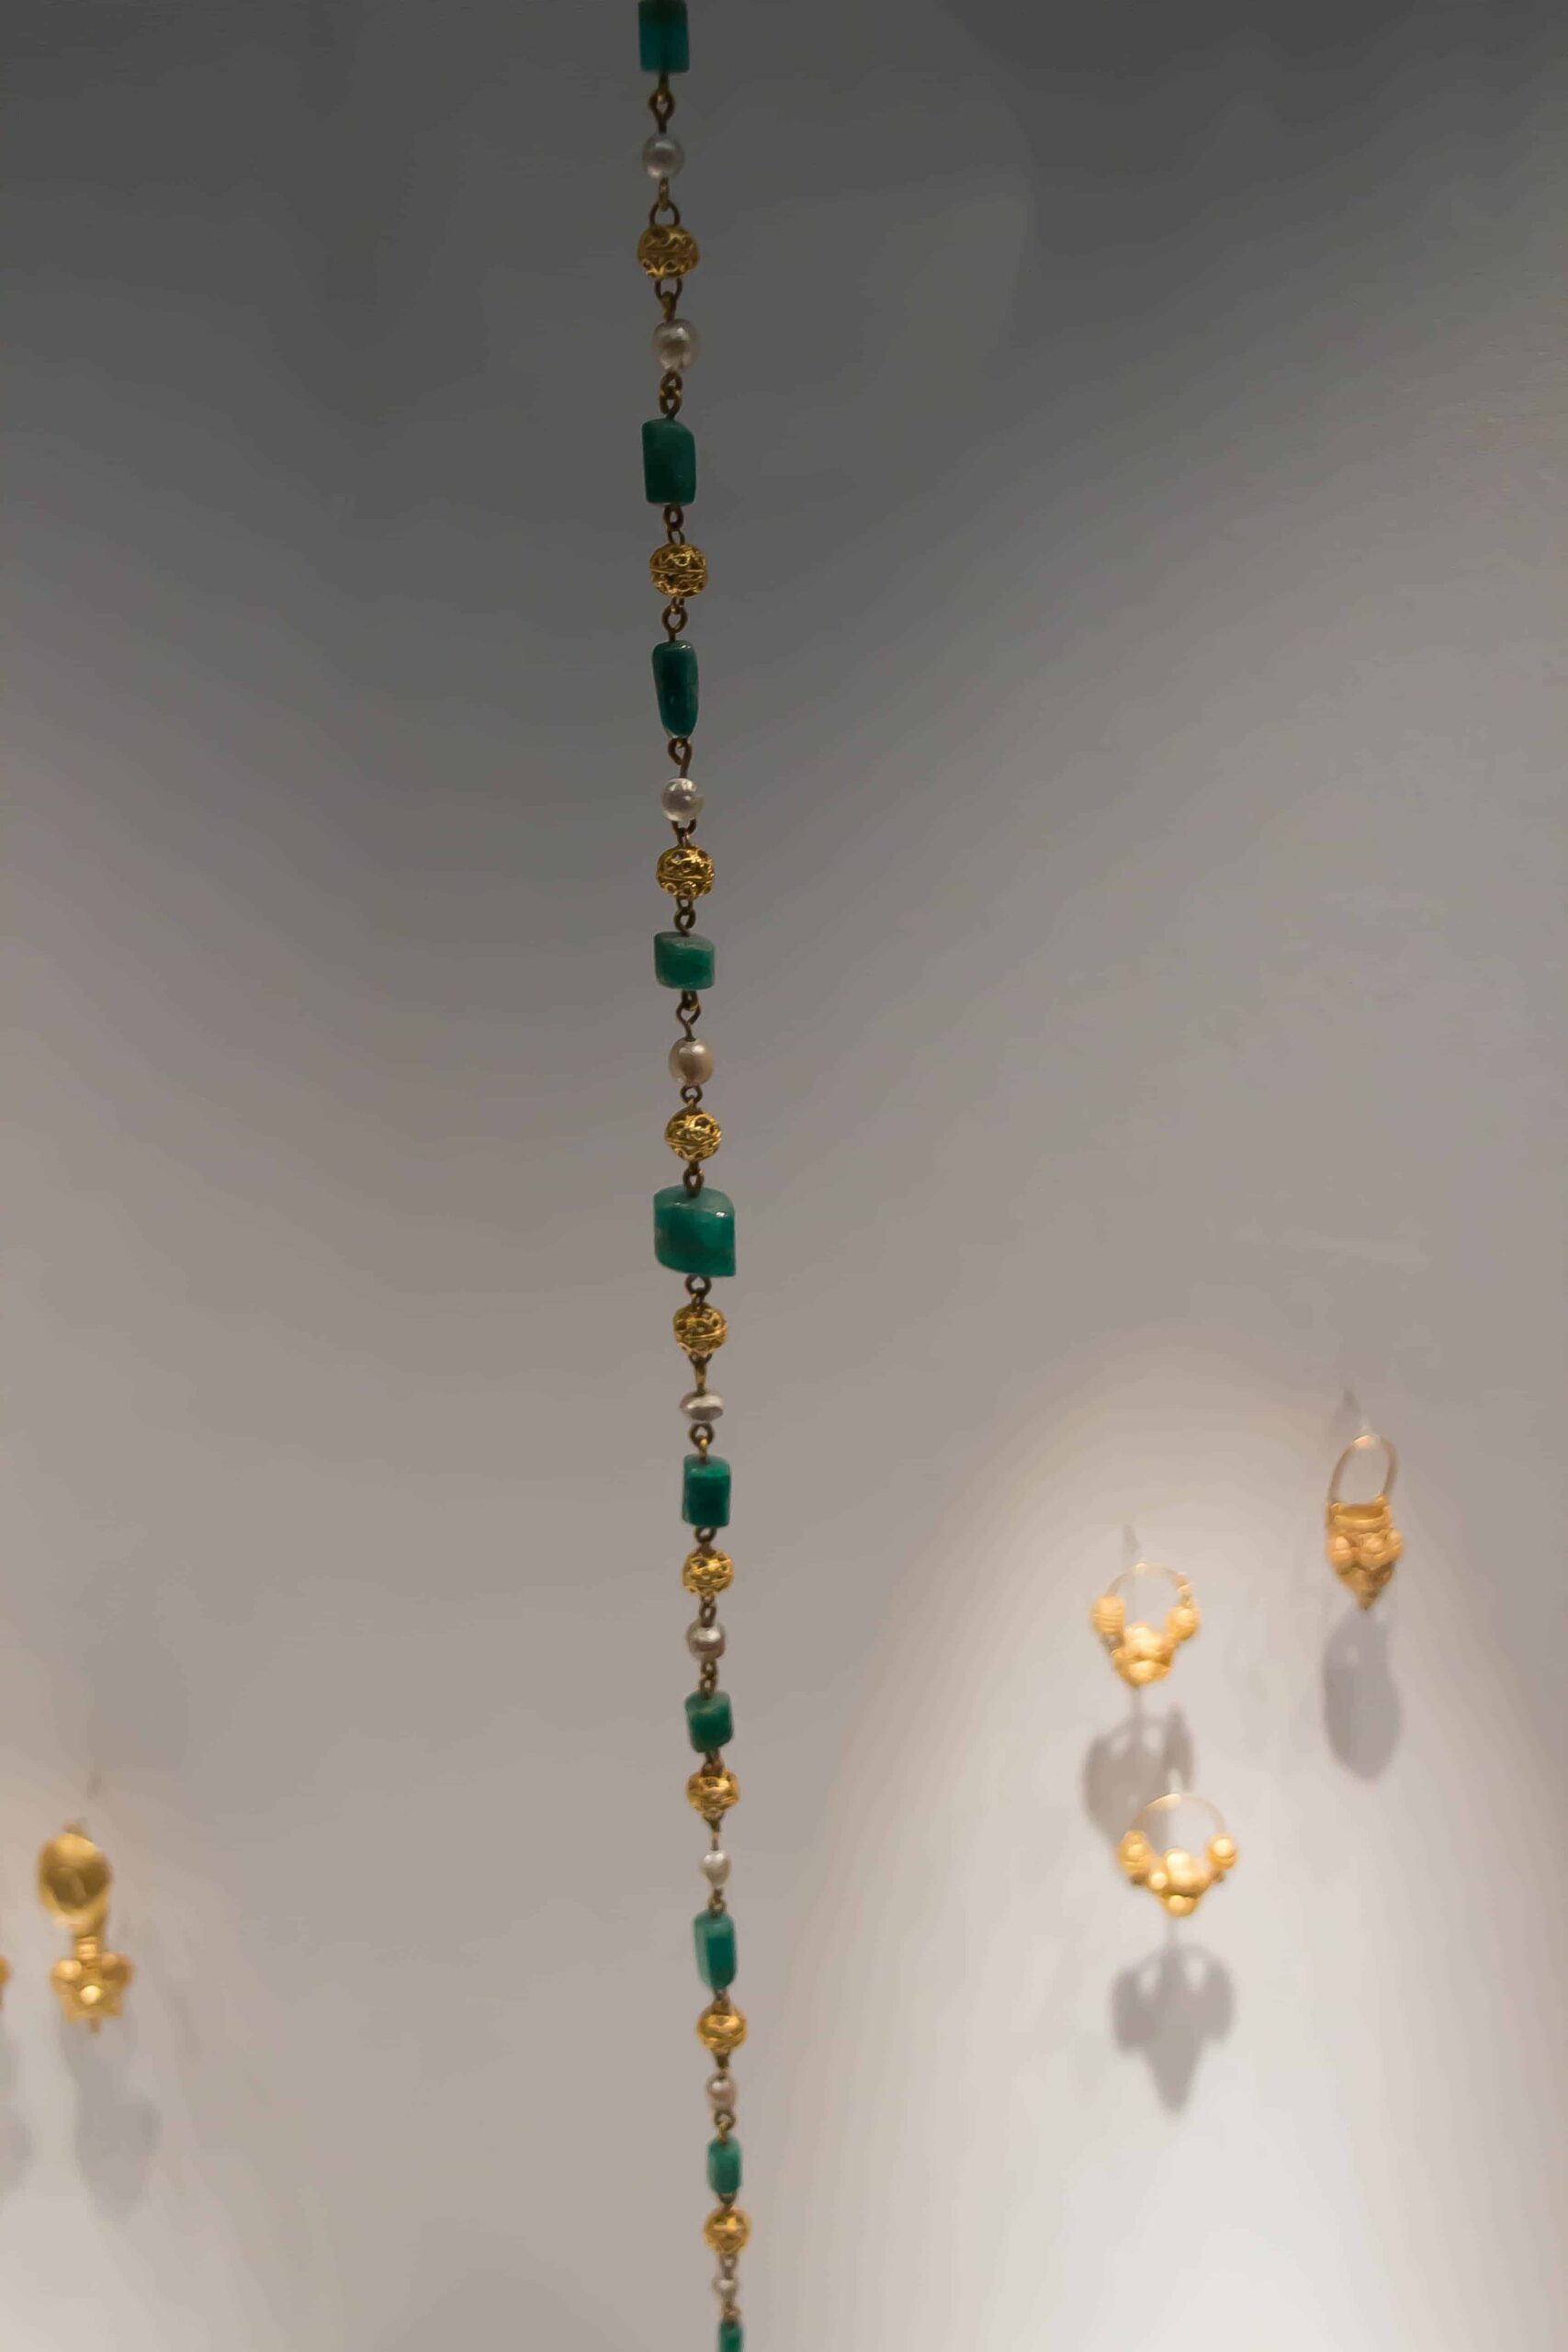 Ancient Emerald Necklace